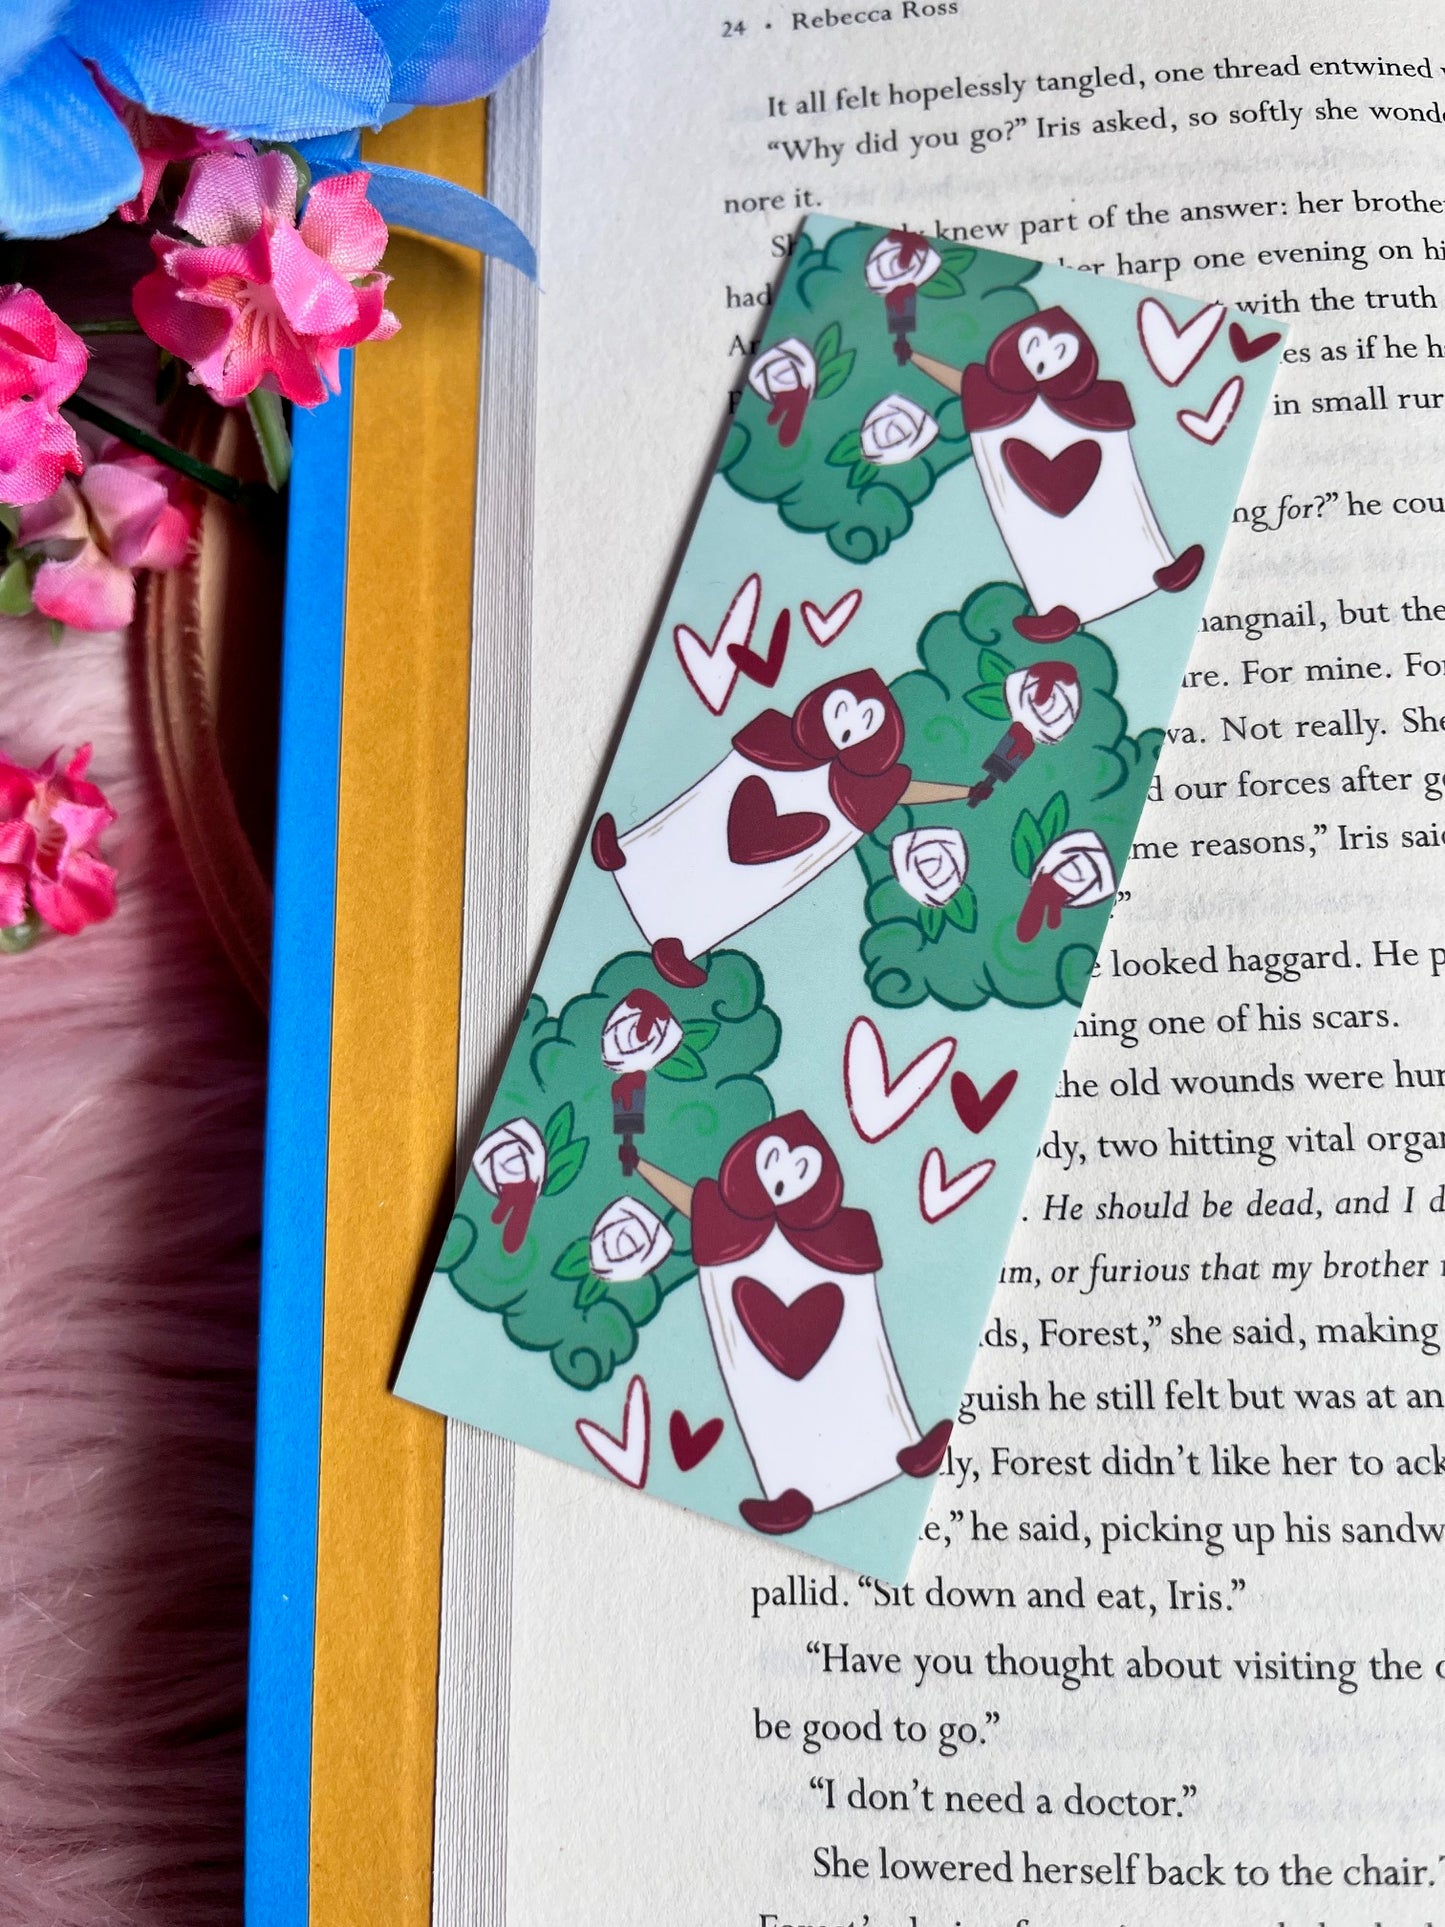 Painting the Roses Bookmark